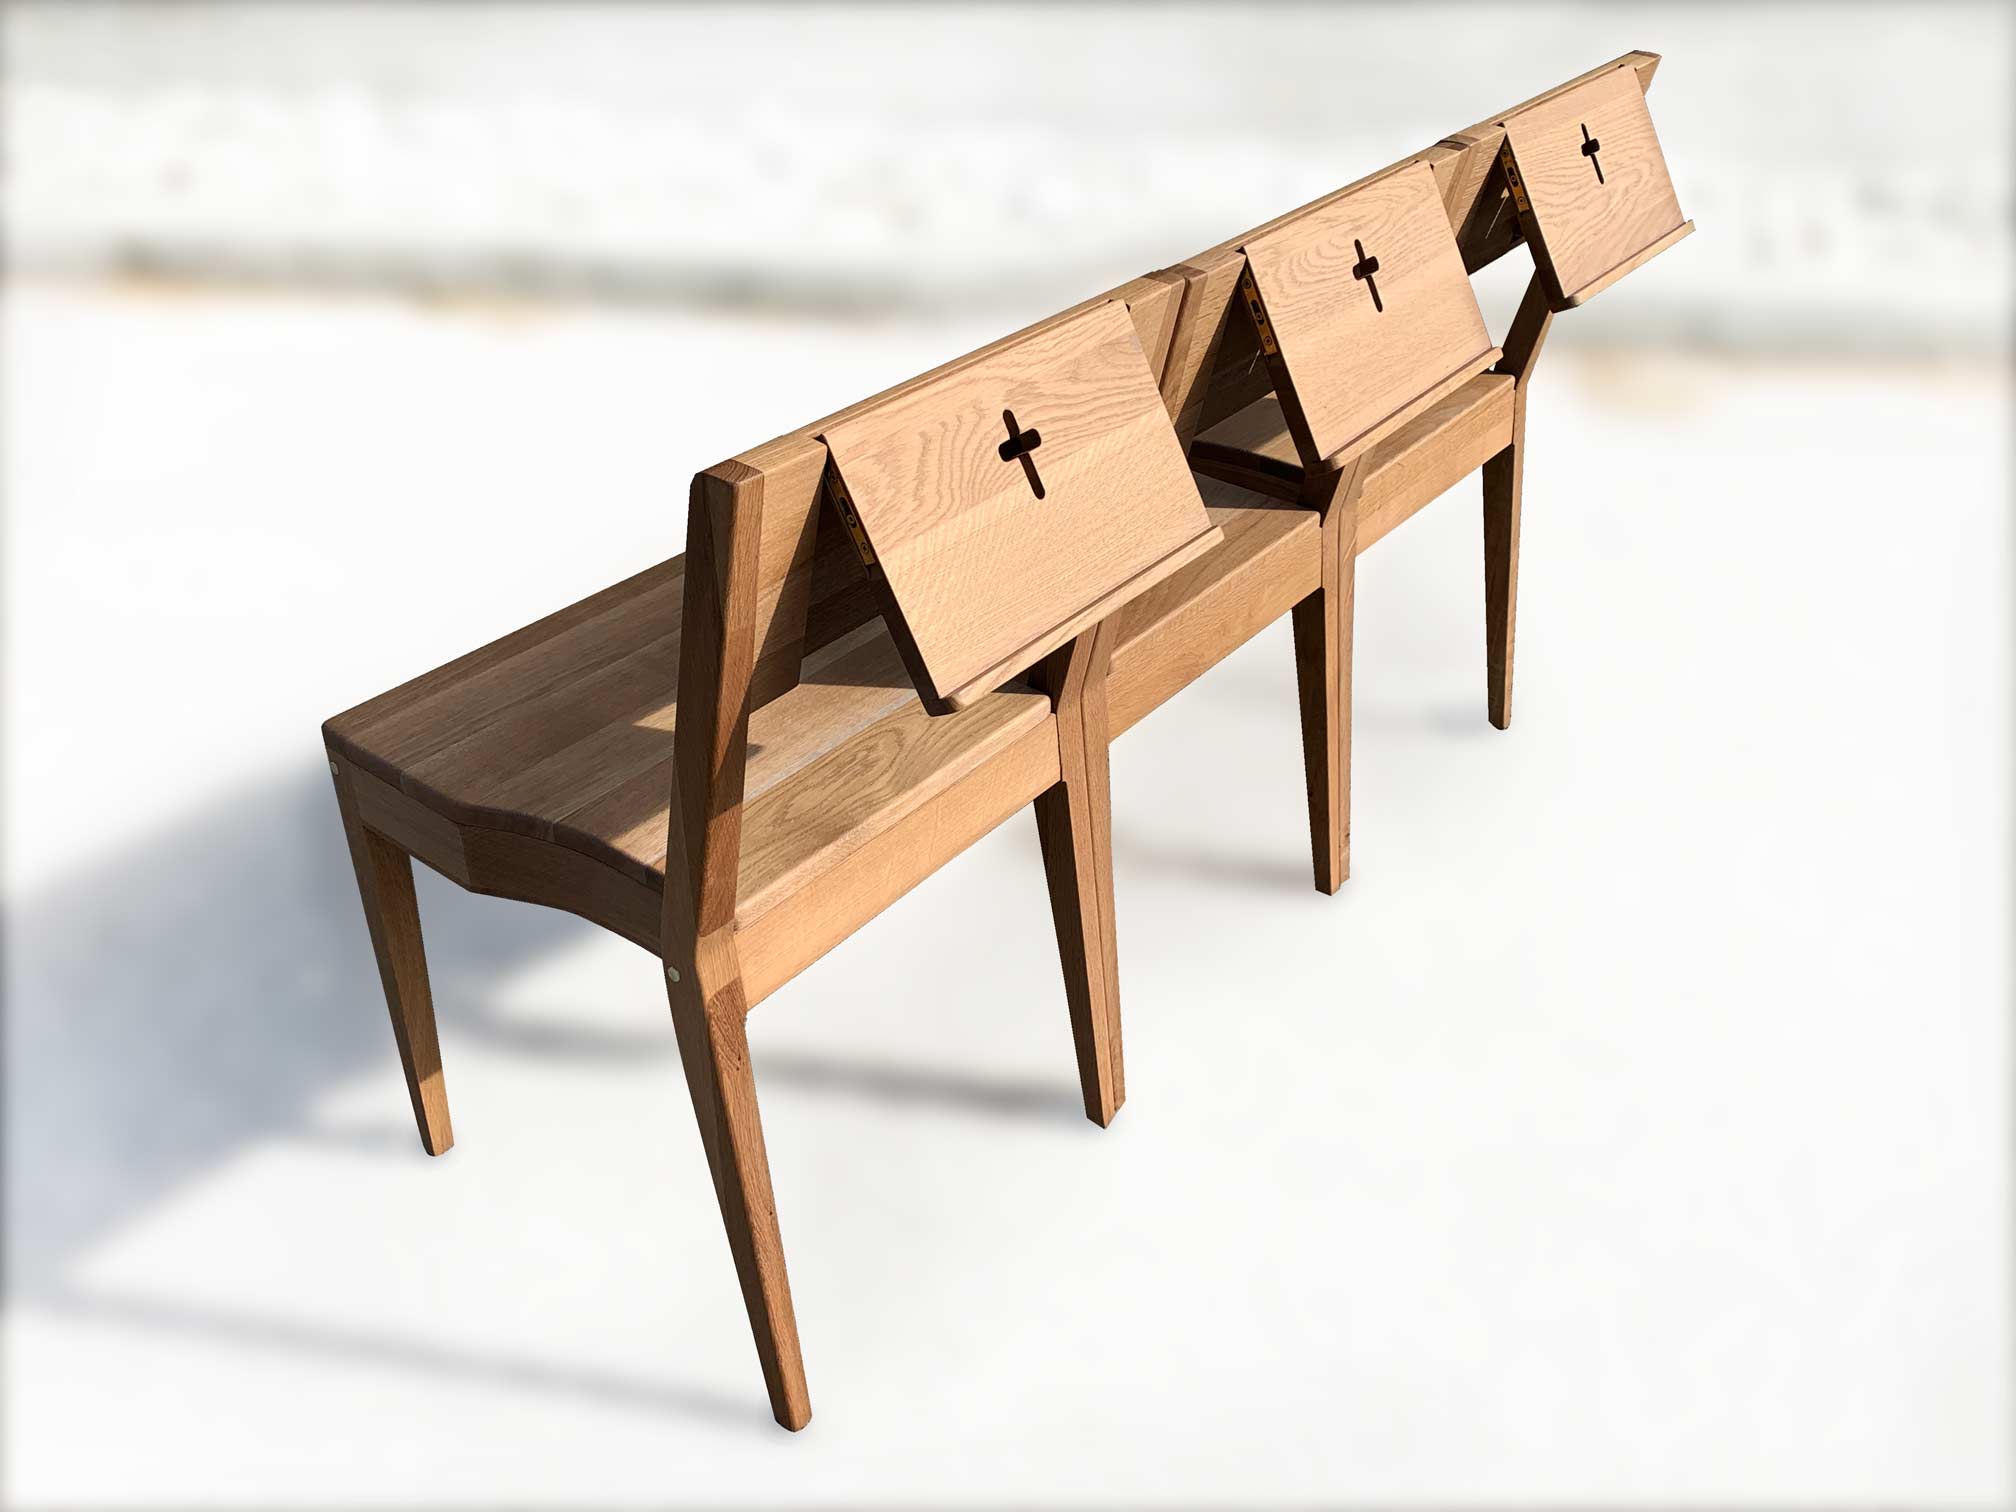 Three church chairs in pew with Bible holders made of oak wood.